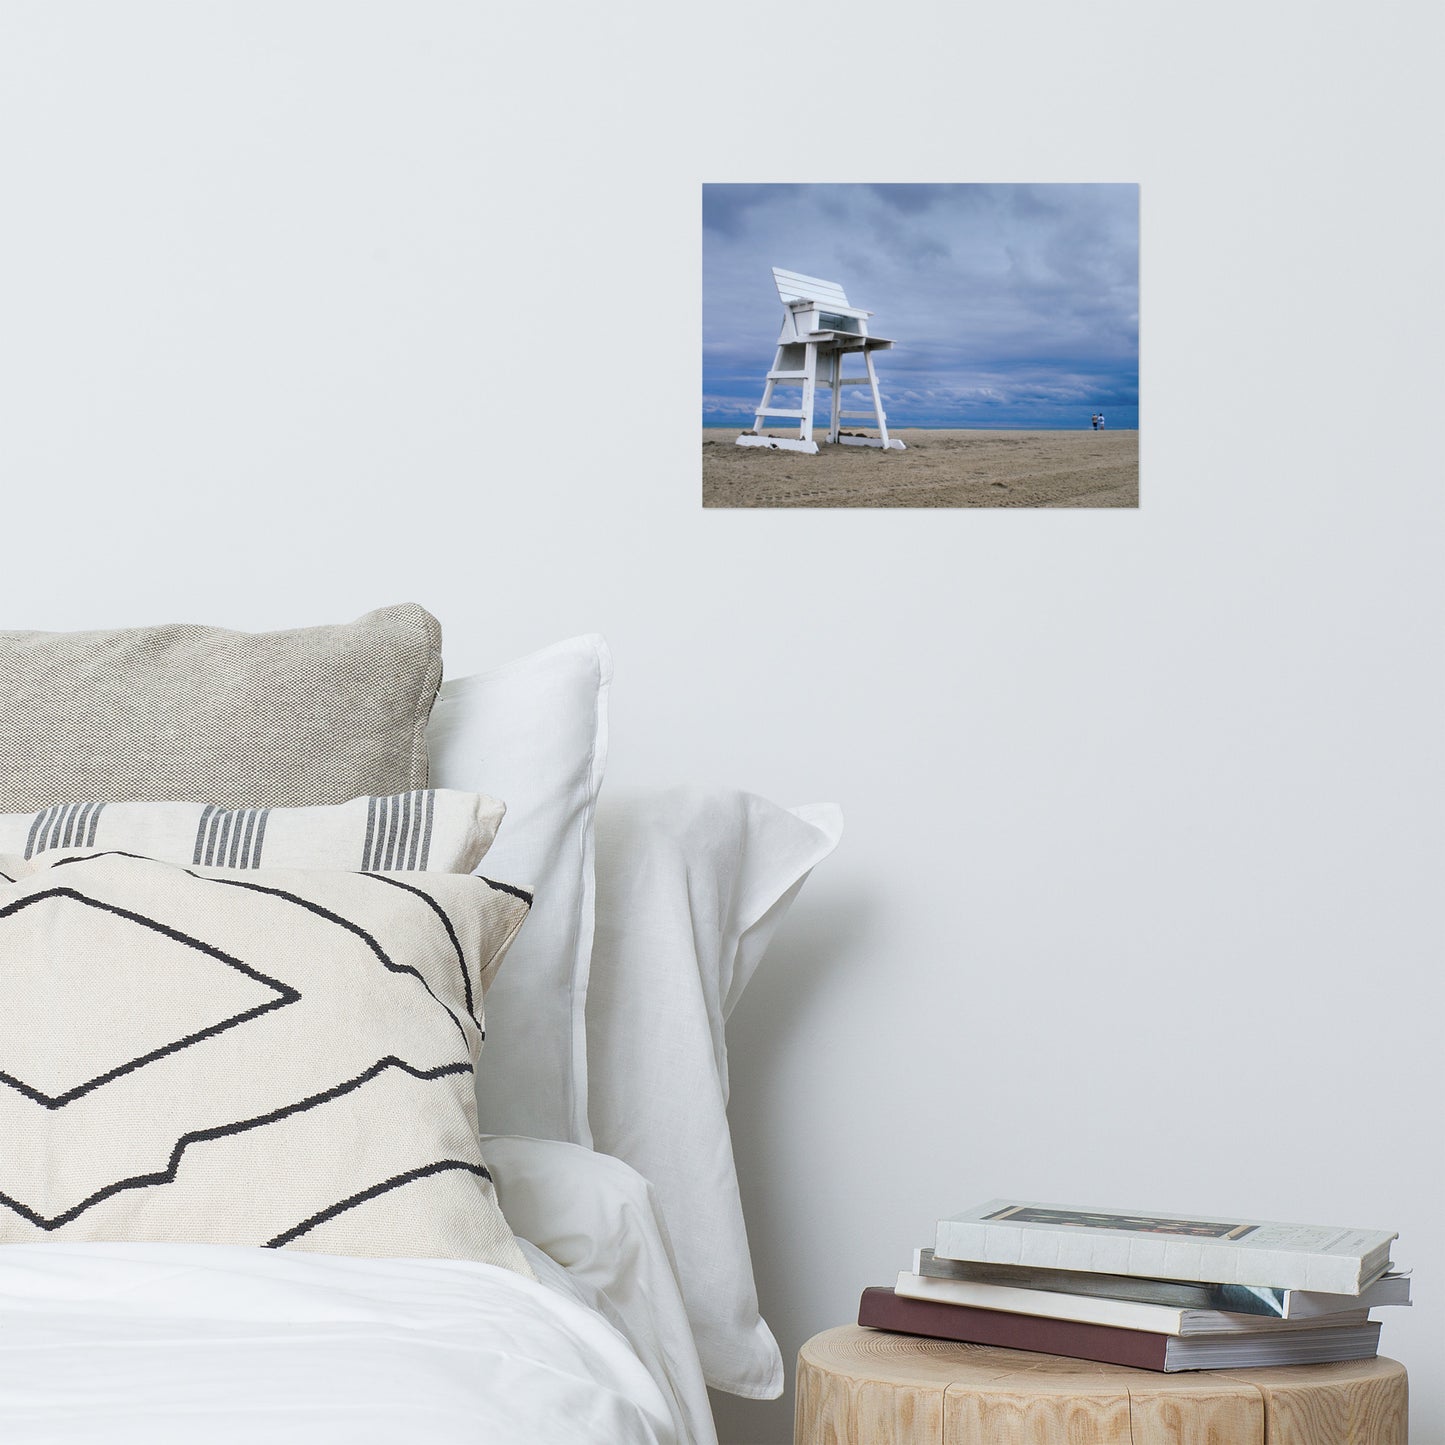 Bed Wall Hanging: Stormy Skies - Beach / Coastal / Seascape Nature / Landscape Photograph Loose / Unframed Wall Art Print - Artwork